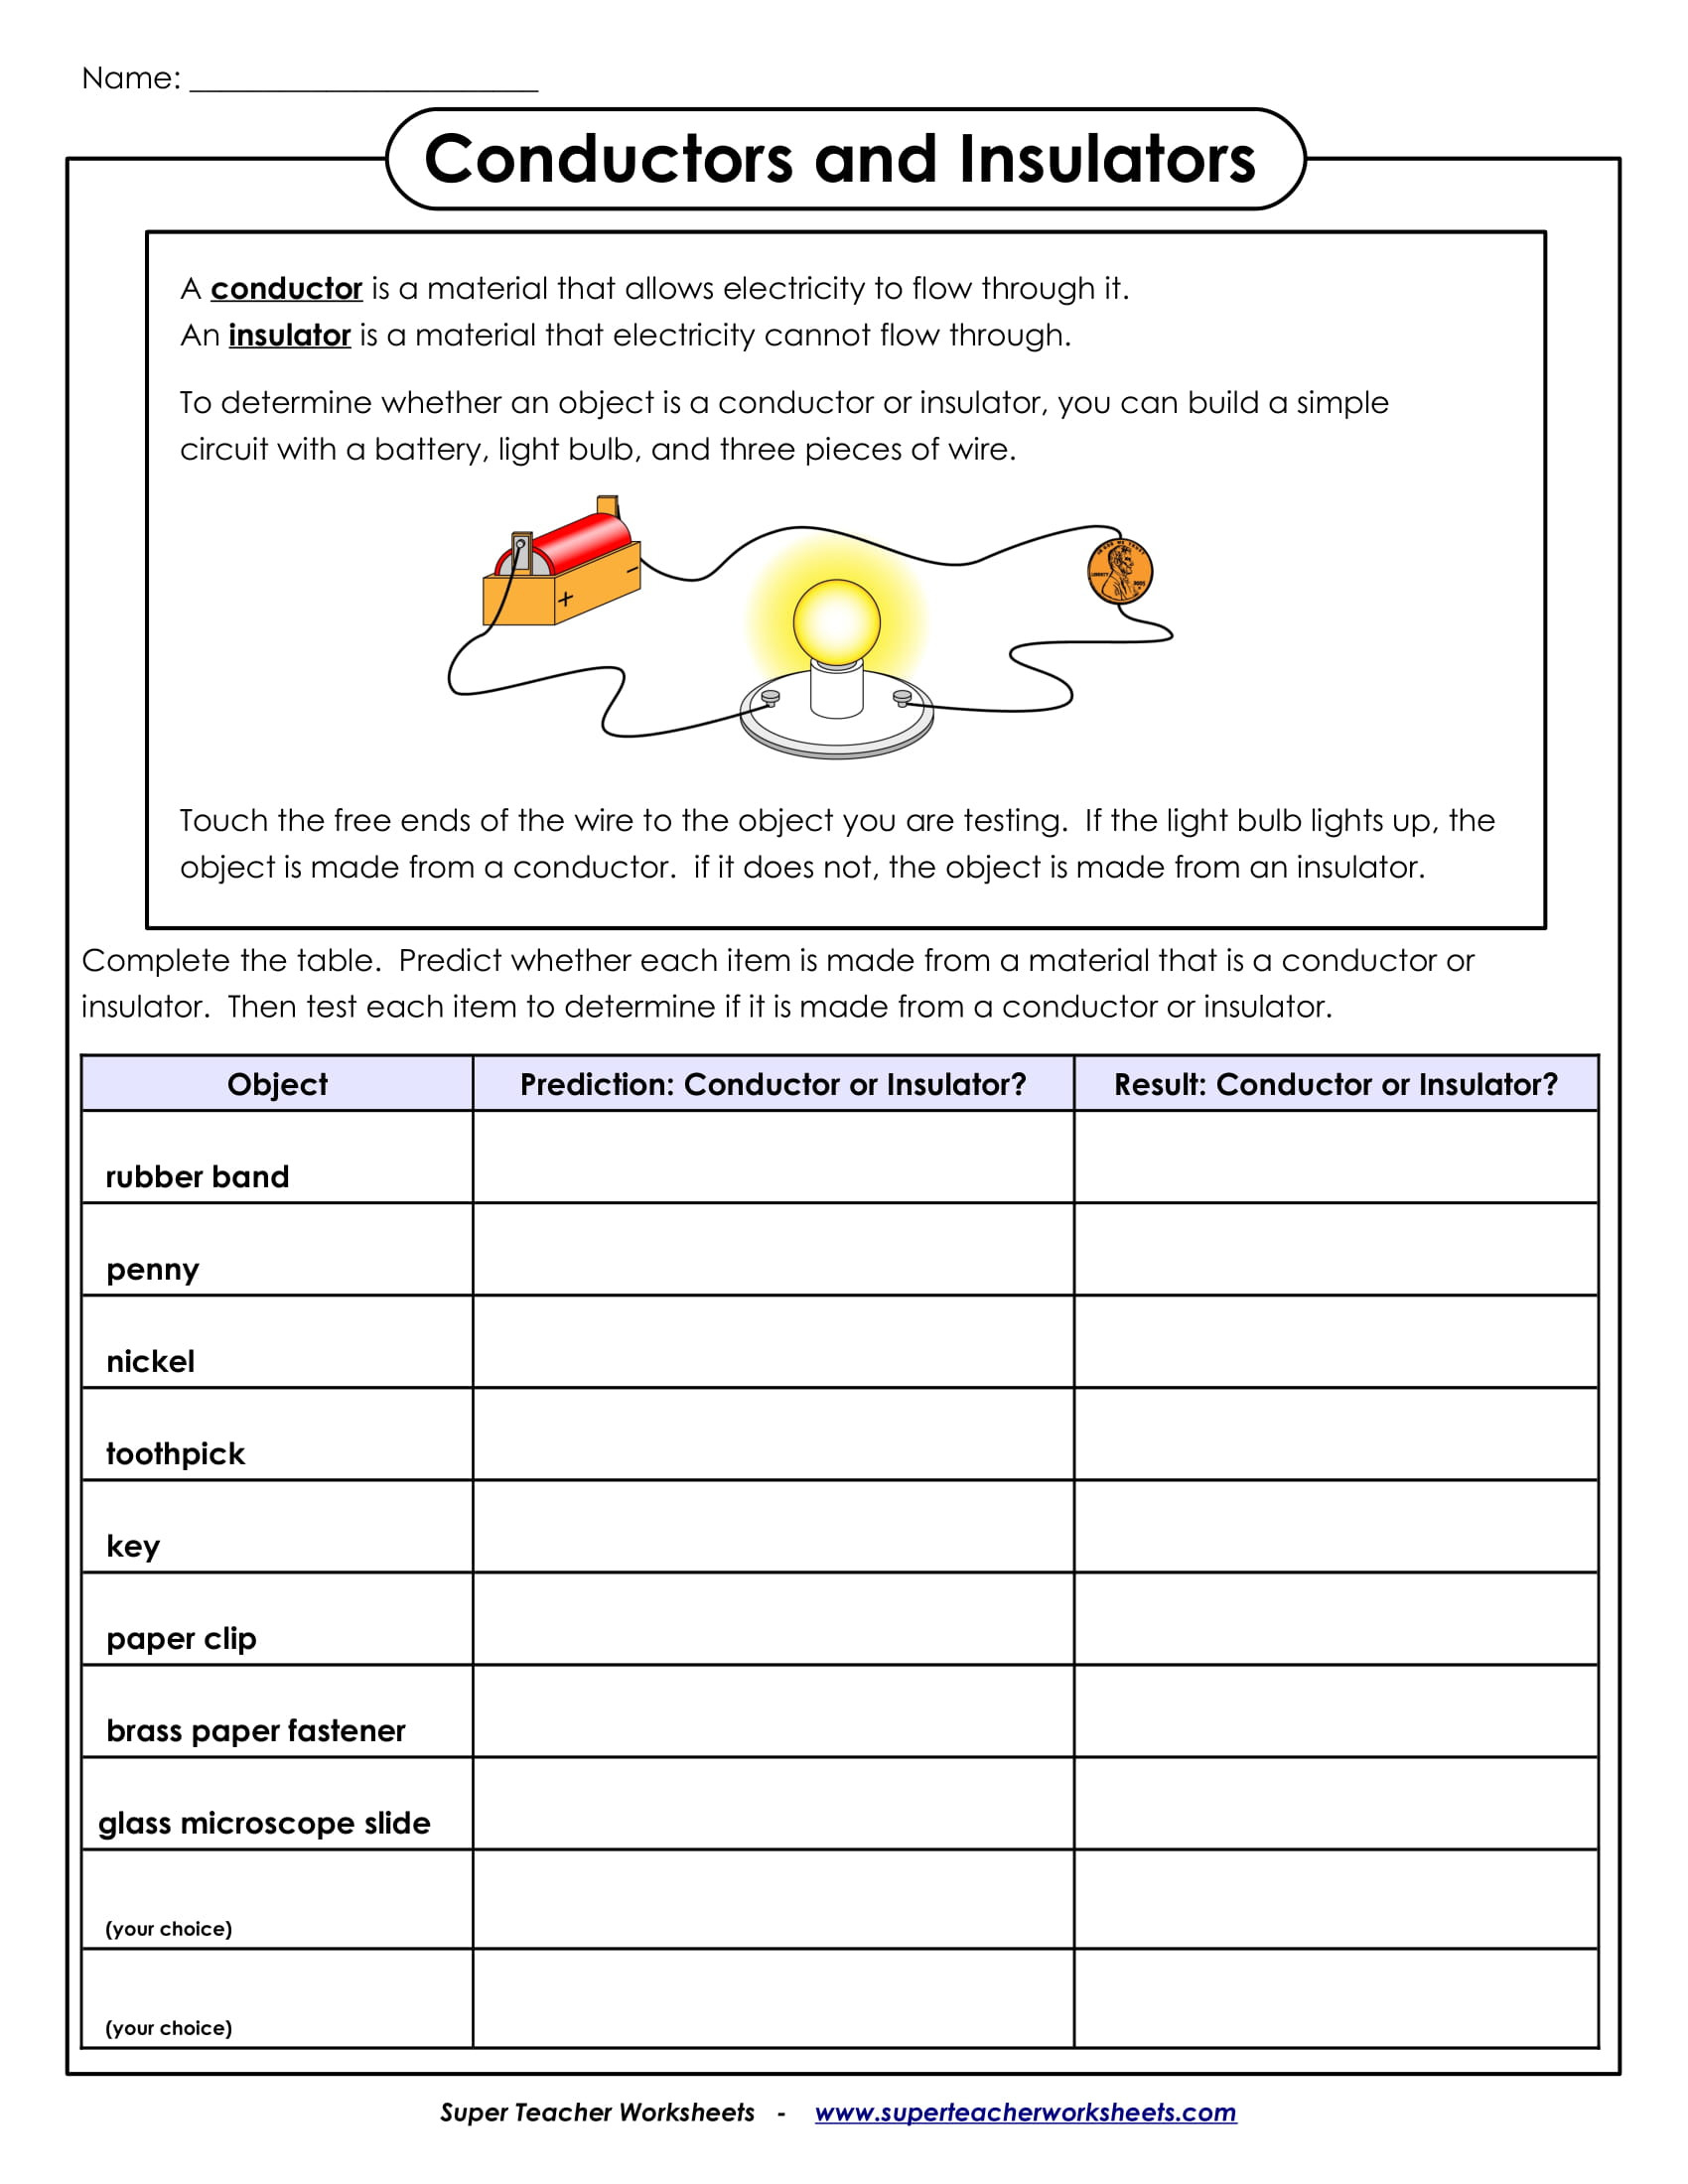 teach-child-how-to-read-7th-grade-year-7-science-worksheets-pdf